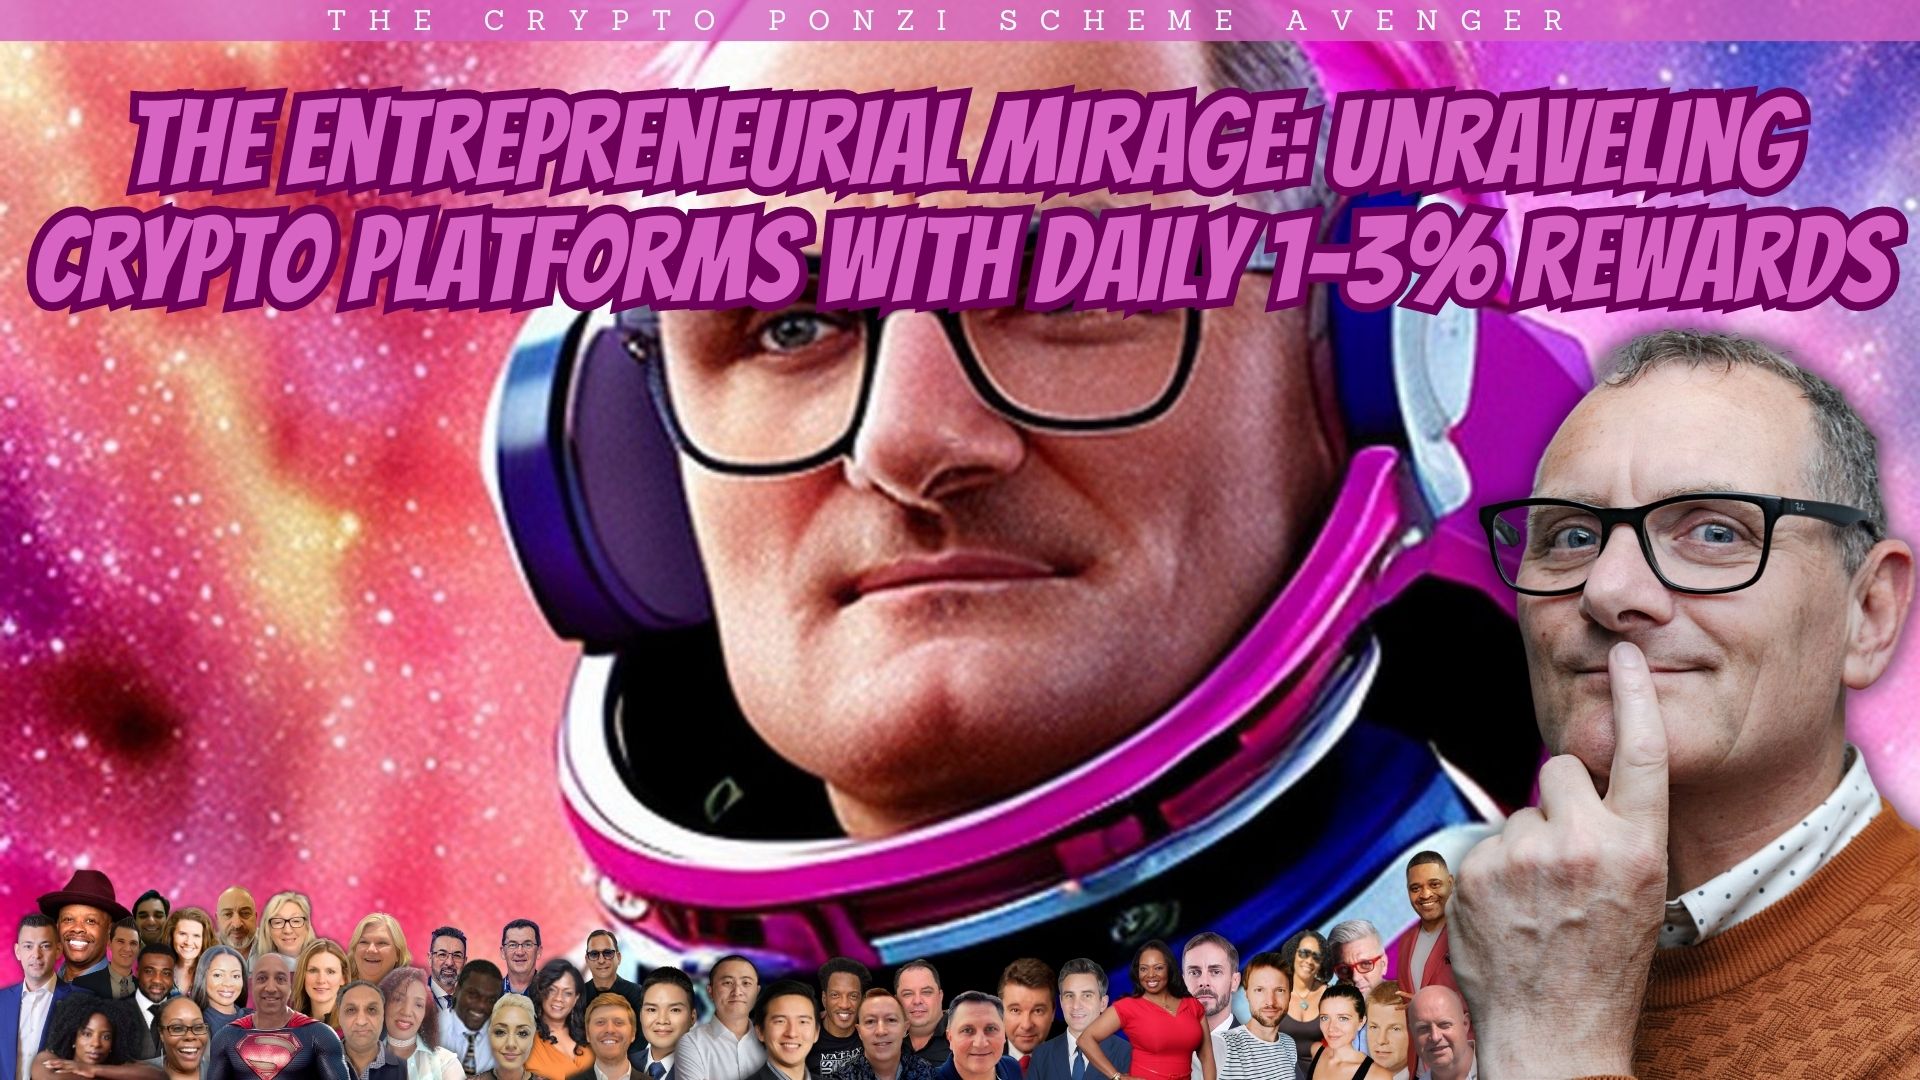 The Entrepreneurial Mirage Unraveling Crypto Platforms with Daily 1 3 Rewards Entrepreneur Decision Maker Connector Podcaster Educator